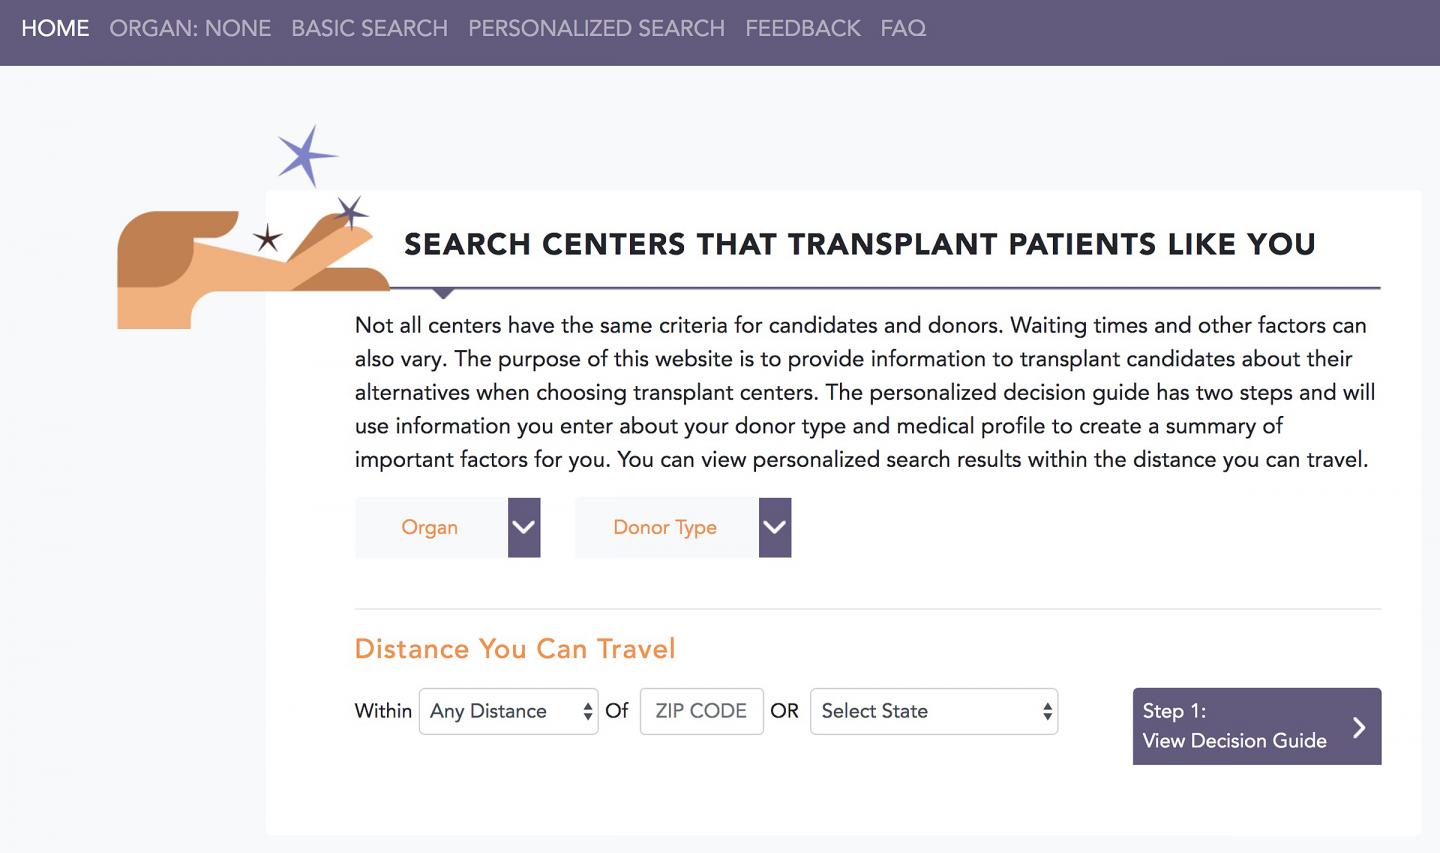 Search centers that transplant patients like you